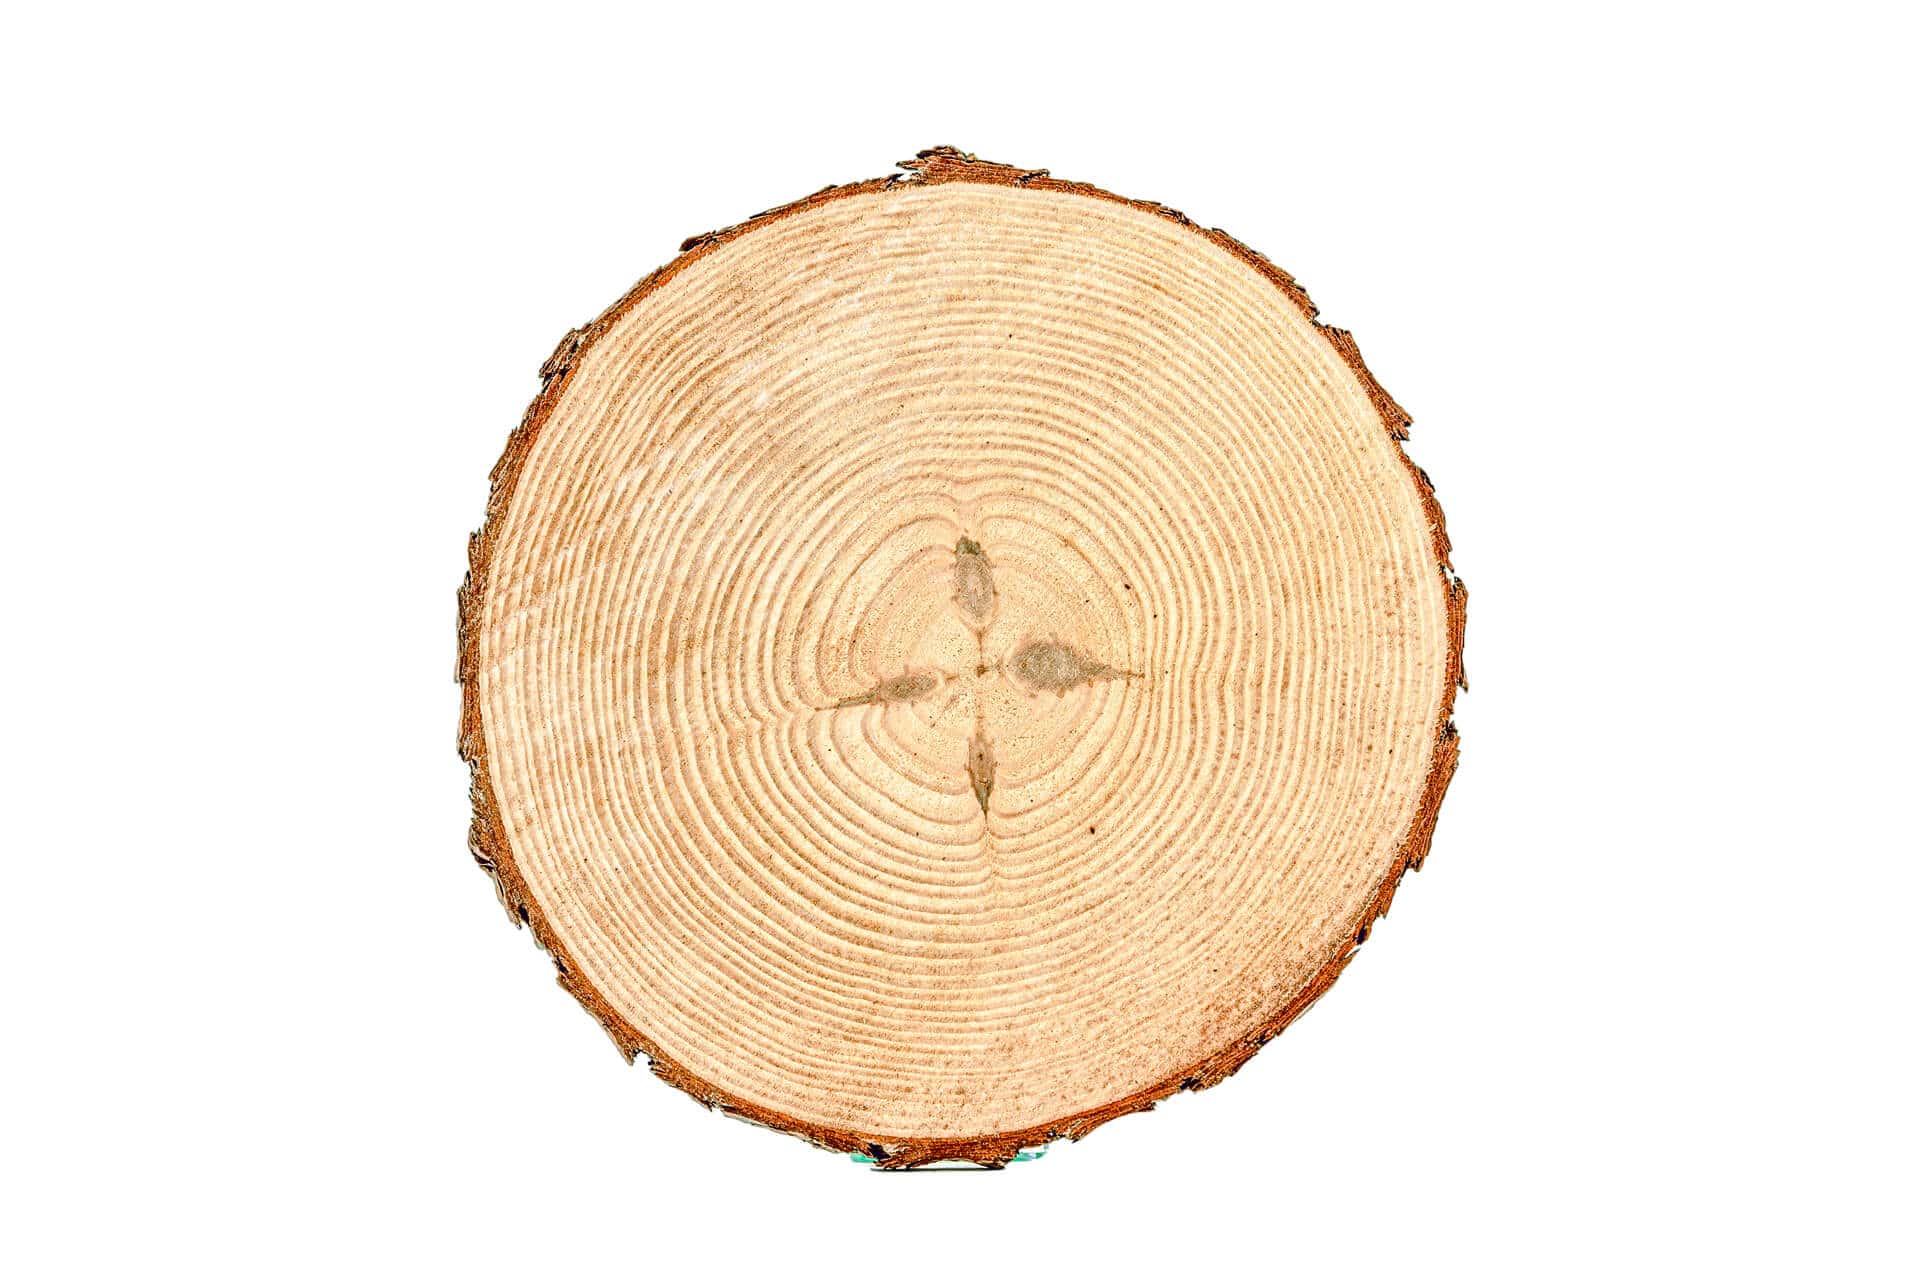 10 Inch 8 Inch Large Rowan Wood Slice Wooden Slices Rustic Wood Slices for  DIY Rowan Wood Large Wood Slices 10 Inch Slices 